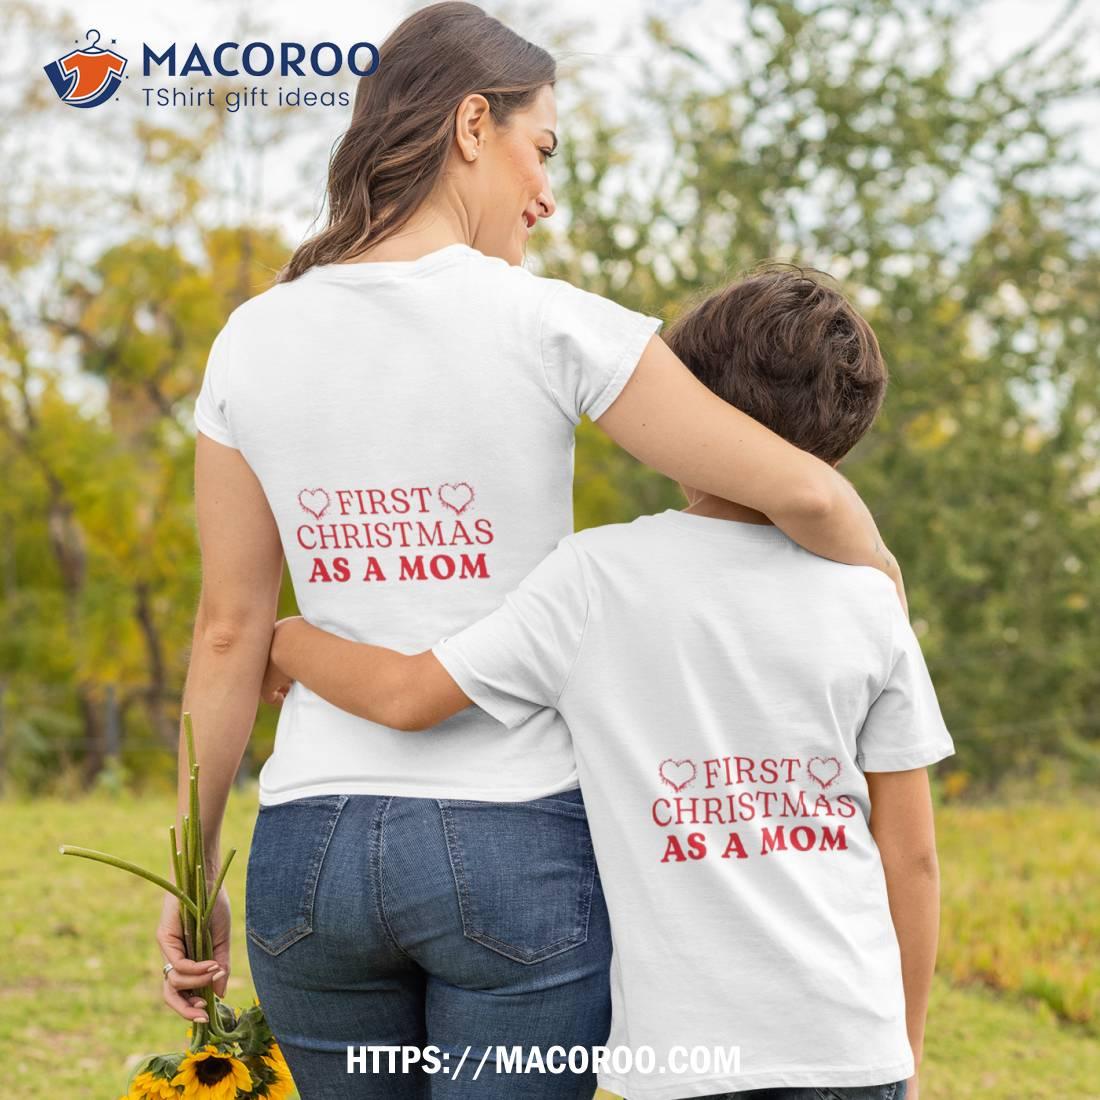 https://images.macoroo.com/wp-content/uploads/2023/08/first-christmas-as-a-mom-shirt-christmas-gifts-for-new-moms-tshirt-2.jpg